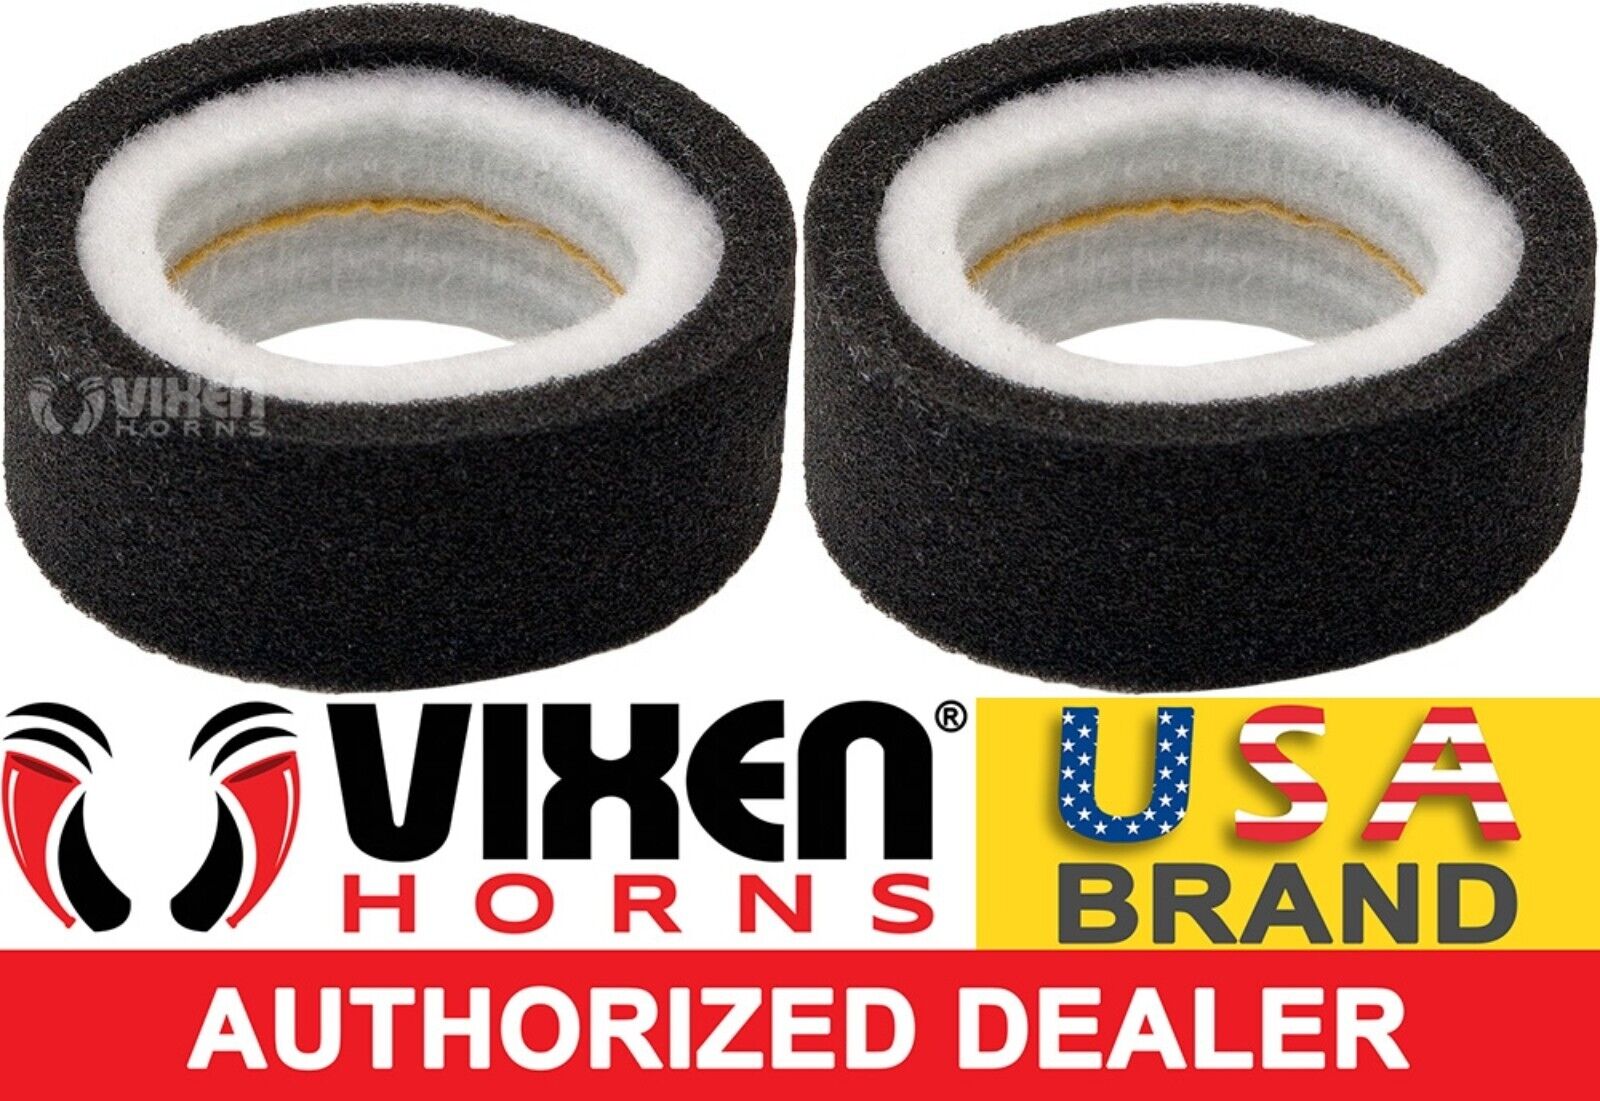 COMPRESSOR REMOTE INTAKE AIR FILTER FOAM ELEMENT REPLACEMENT KIT 2-PACK VXA7161